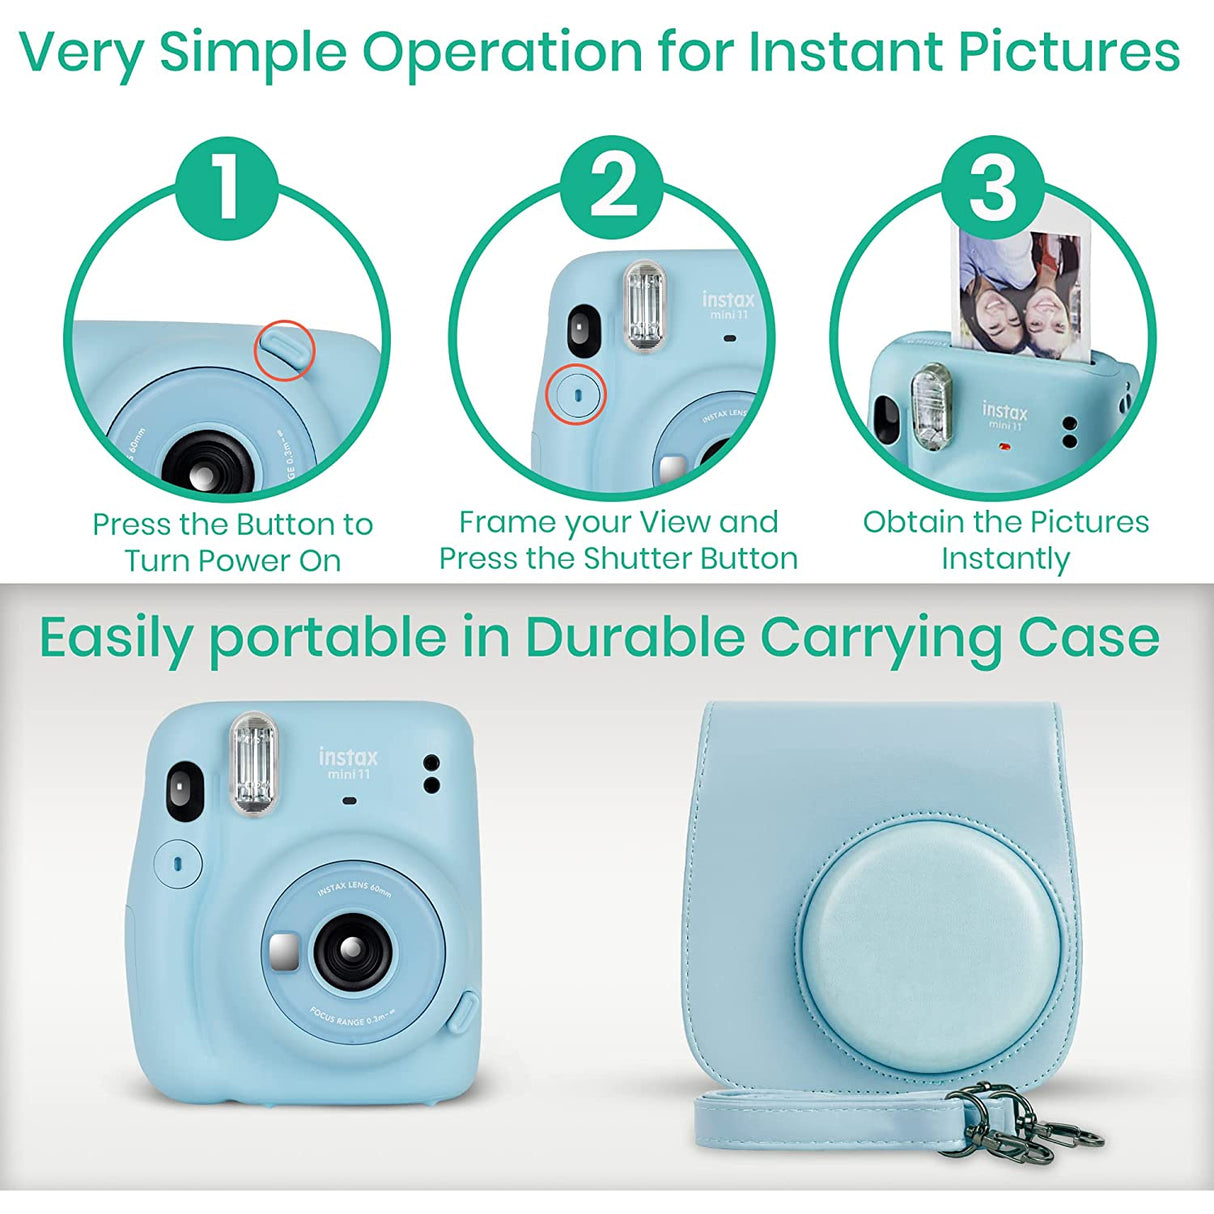 Fujifilm Instax Mini 11 Camera with Fujifilm Instant Mini Film (20 Sheets) Bundle with Deals Number One Accessories Including Carrying Case, Color Filters, Photo Album, Stickers + More